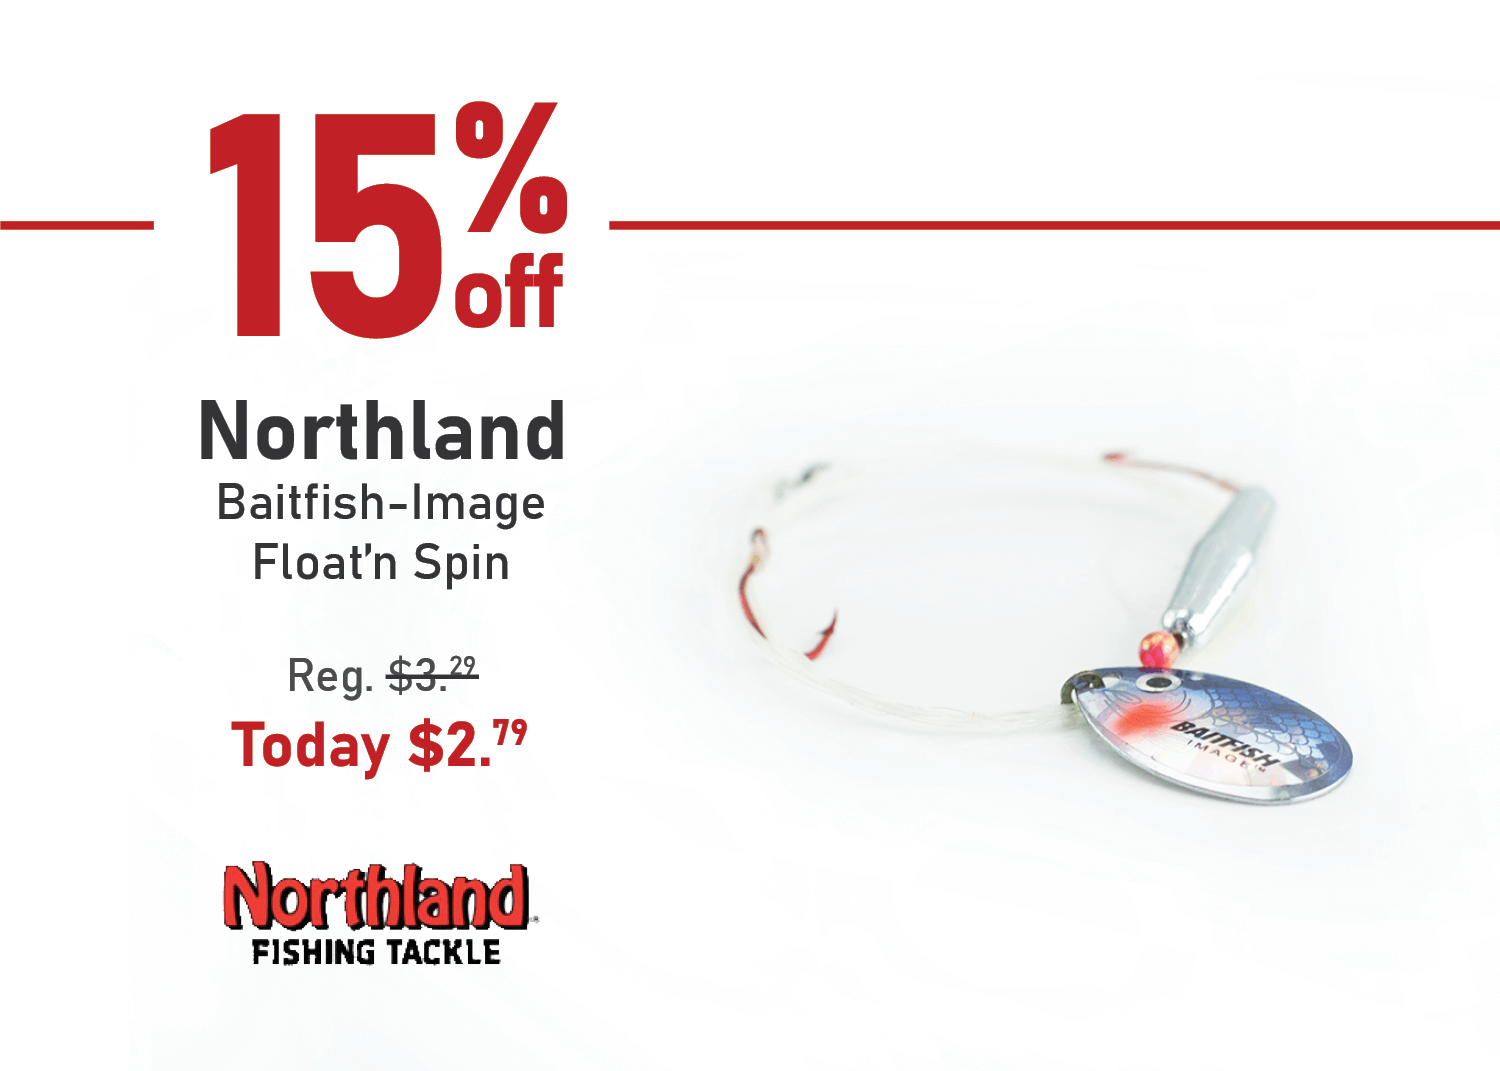 Save 15% on the Northland Baitfish-Image Float'n Spin